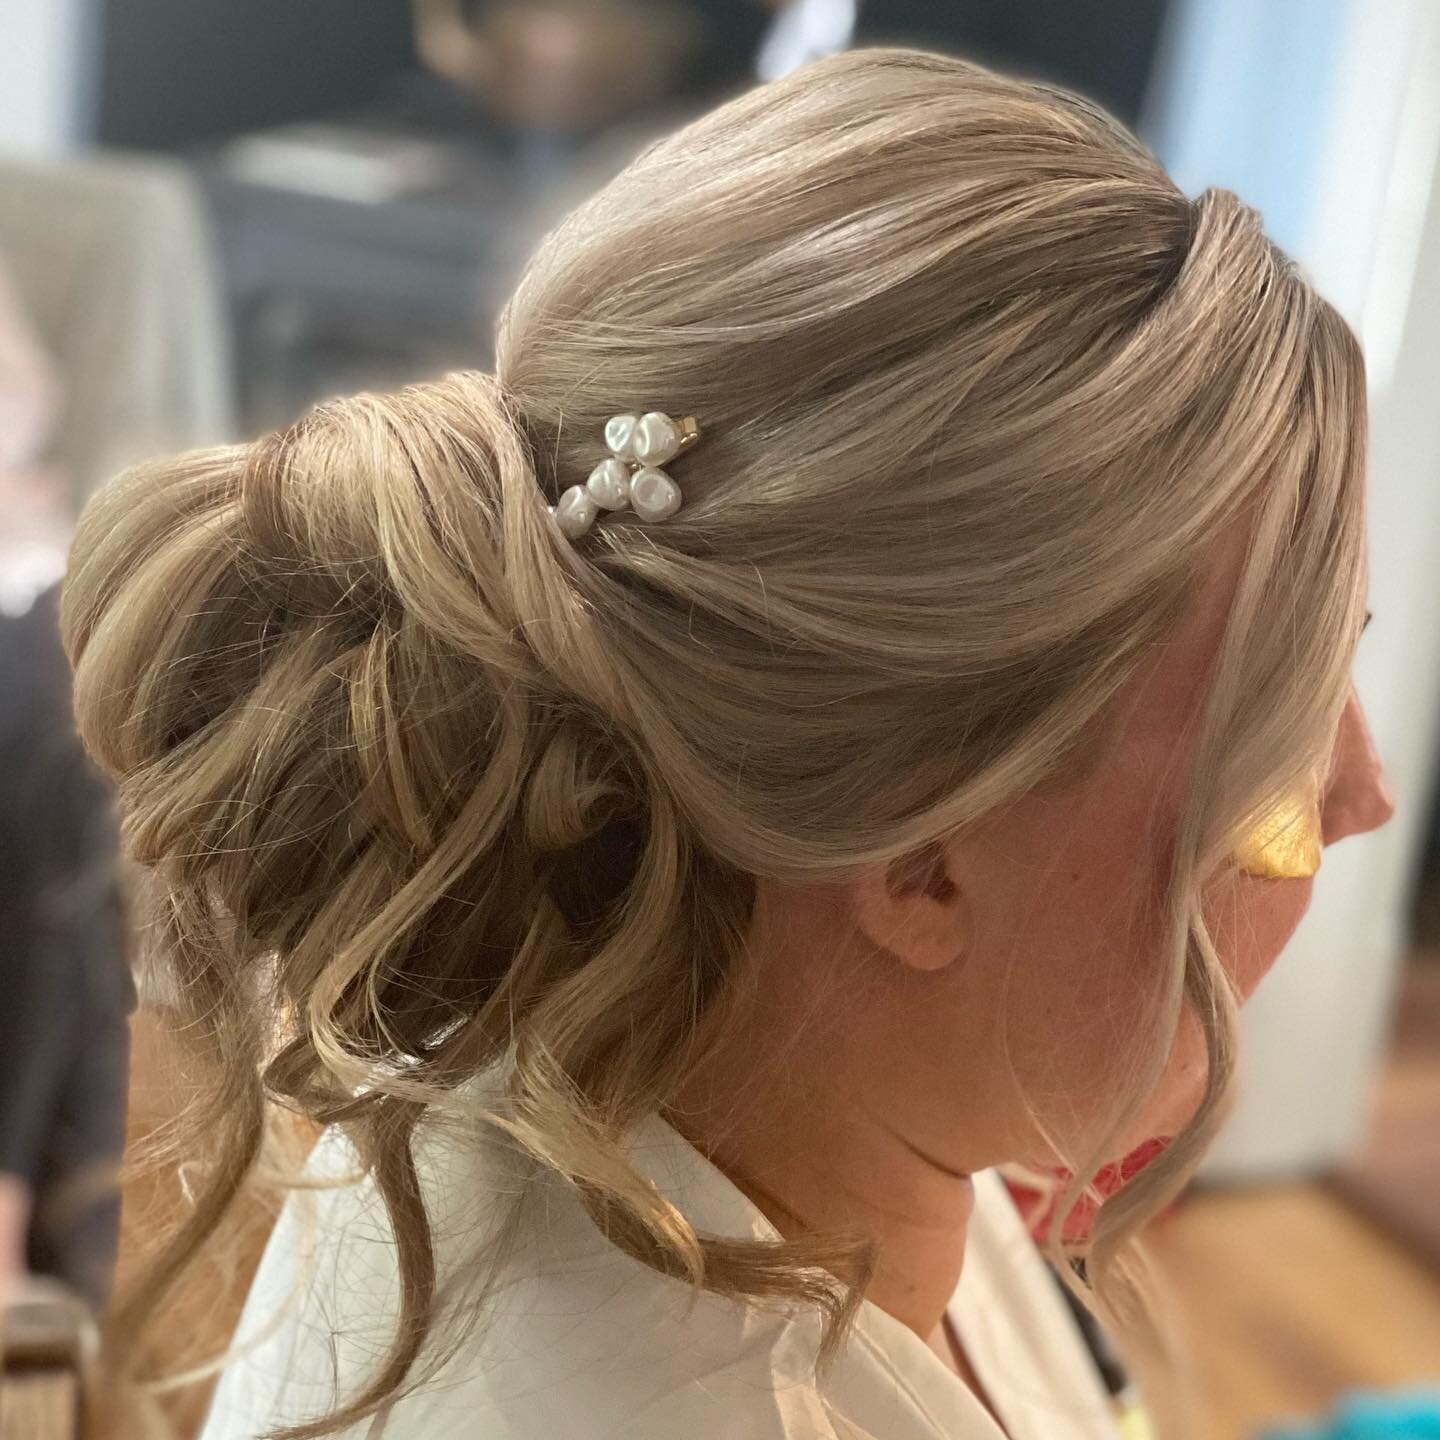 She said I DO 💙 

We love weddings!

We specialize in hair, makeup and all things lashes. All of your wedding beauty needs under one roof!

Bridal and bridal party appointments cannot be booked online. 

Give us a call or send an email and we&rsquo;